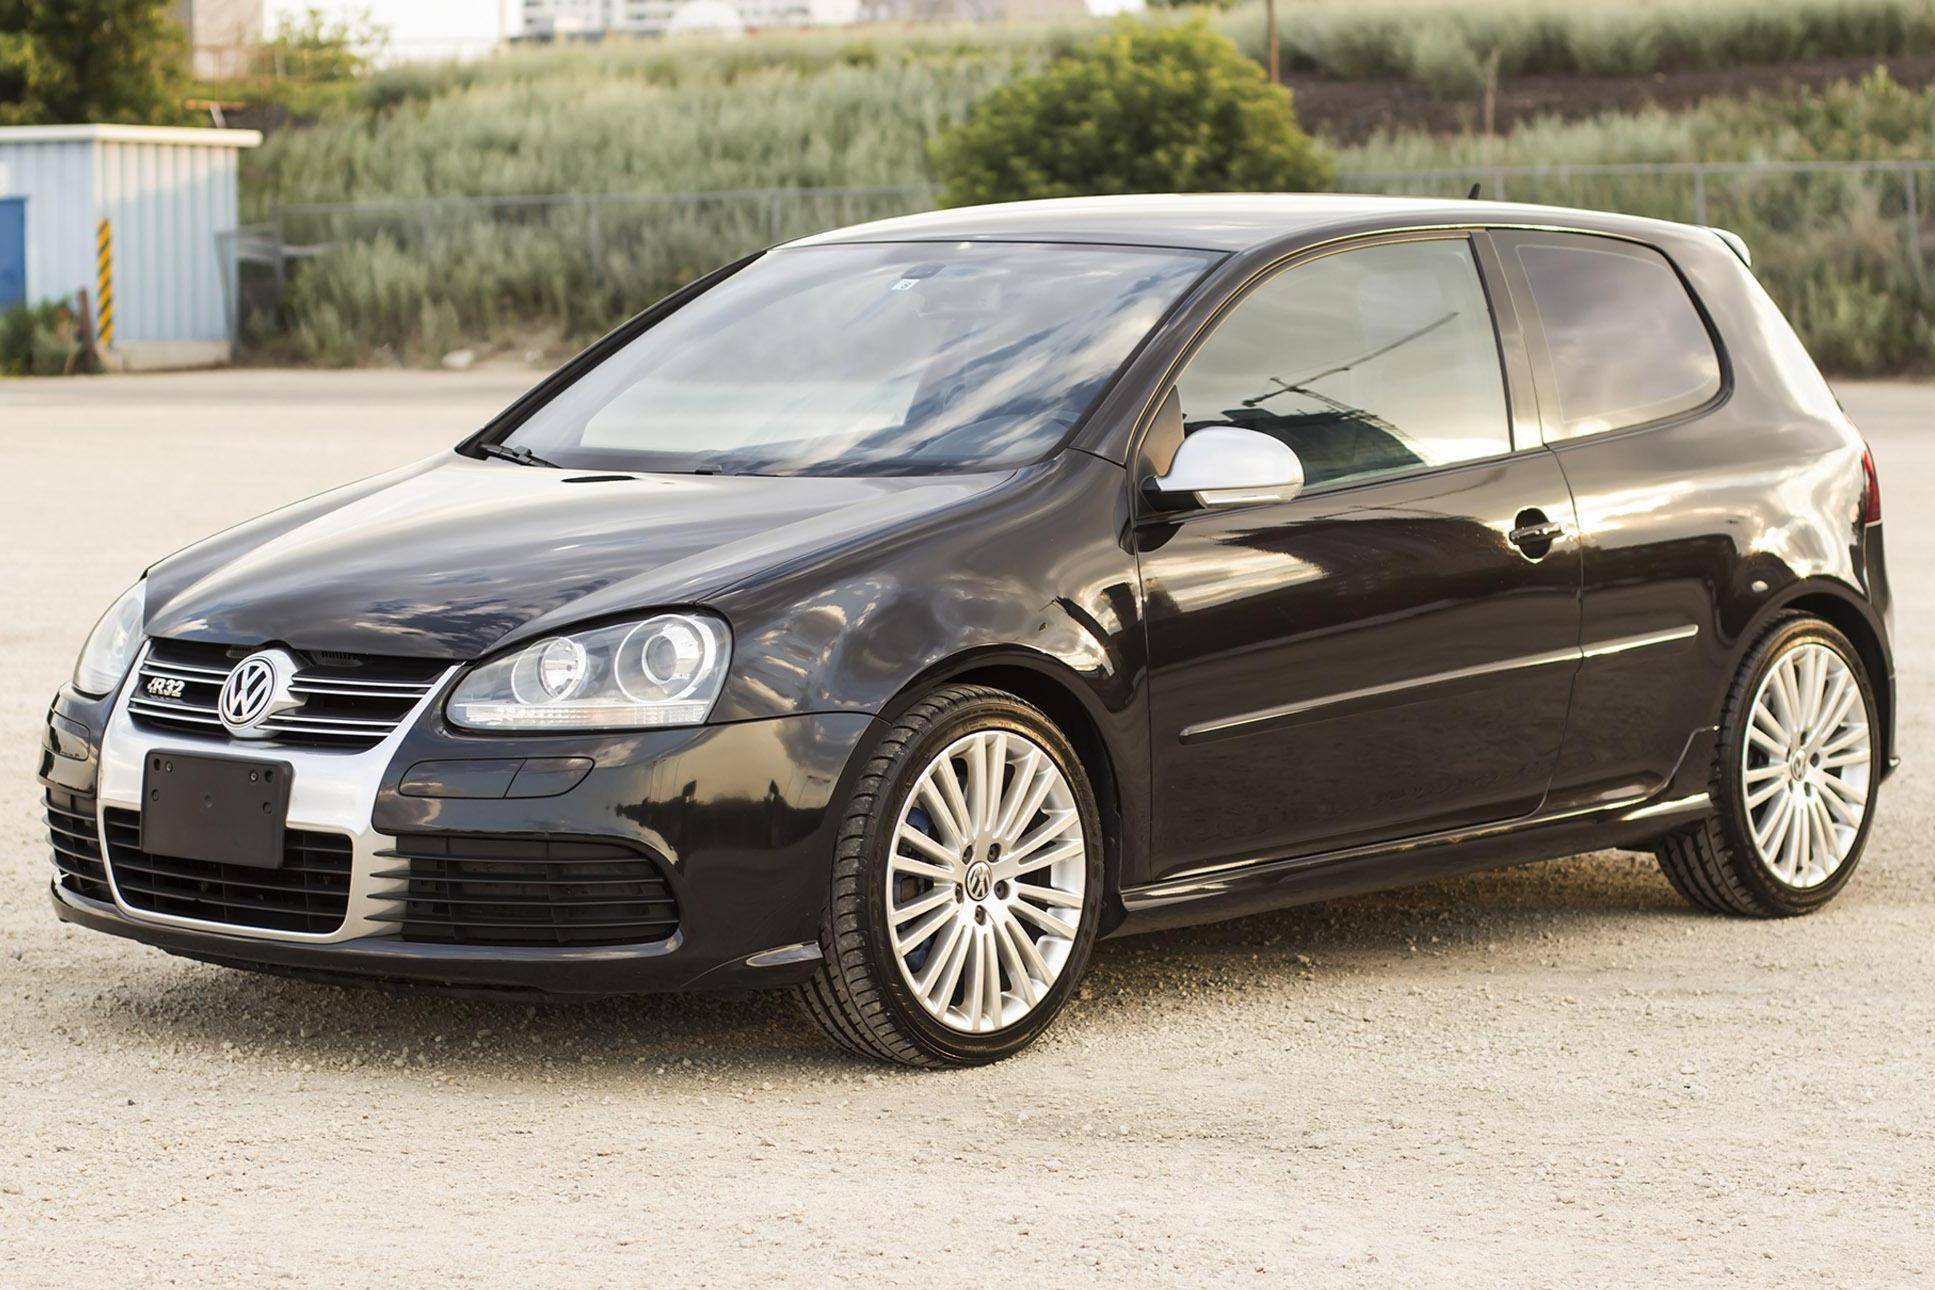 Front View of Black Volkswagen Golf 4 R32 Parked in the Street